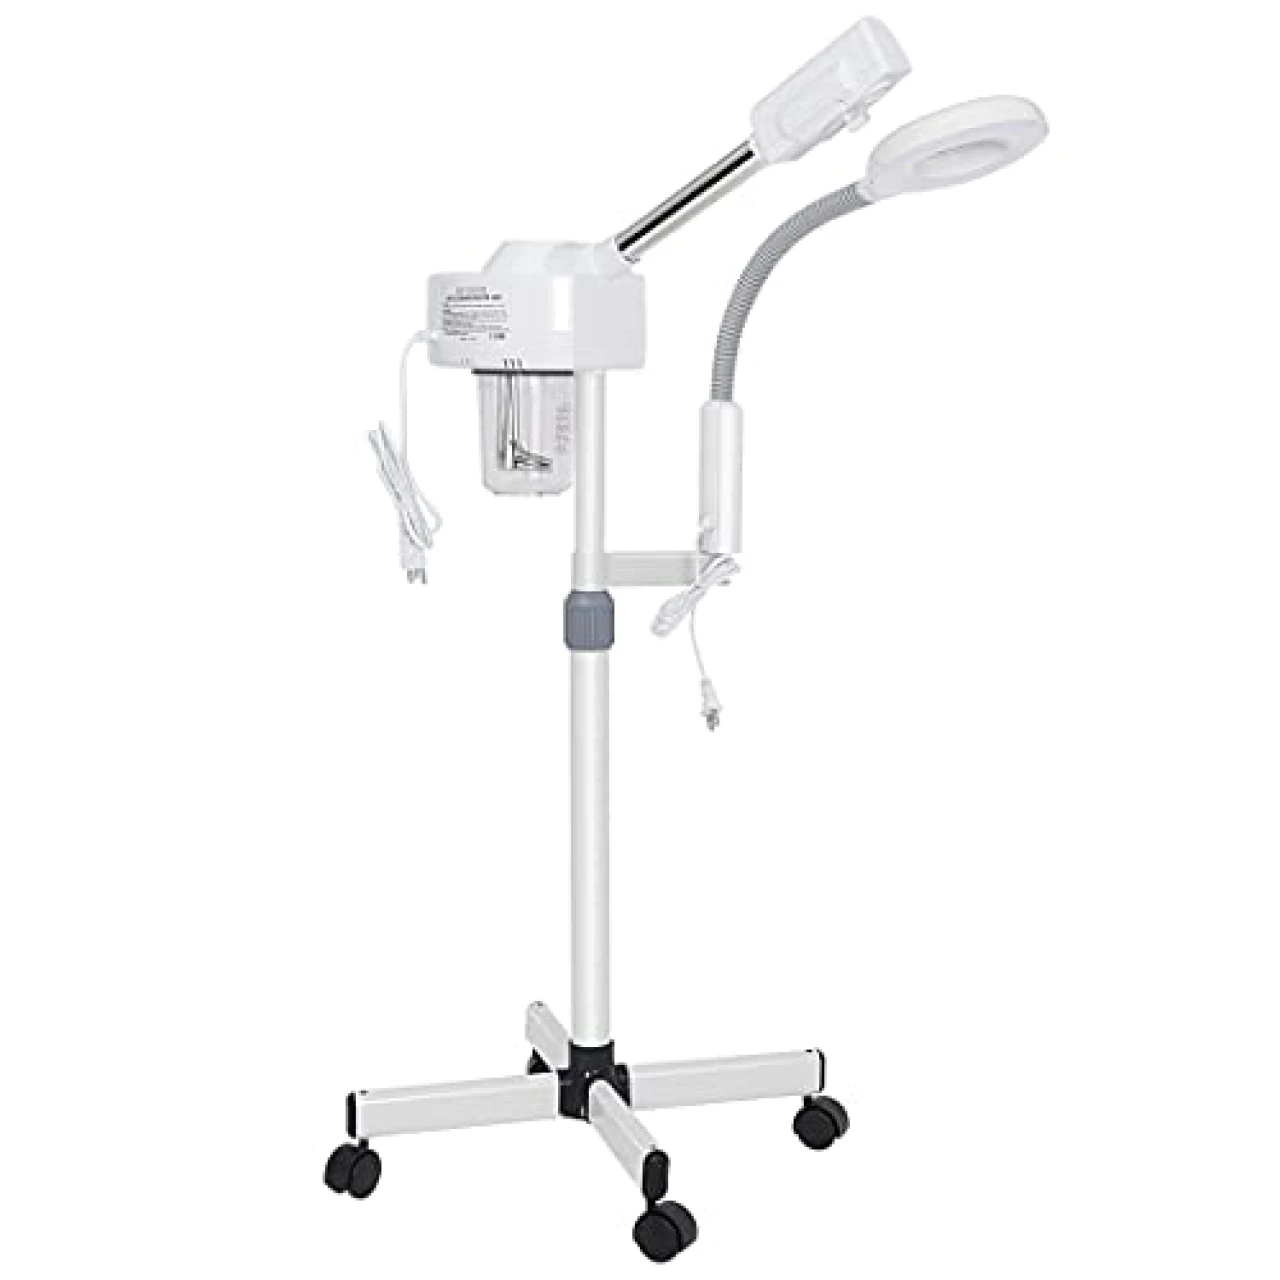 2 in 1 Facial Steamer Pro Ionic Ozone Facial Steamer on Wheels with 5X Magnifying Lamp